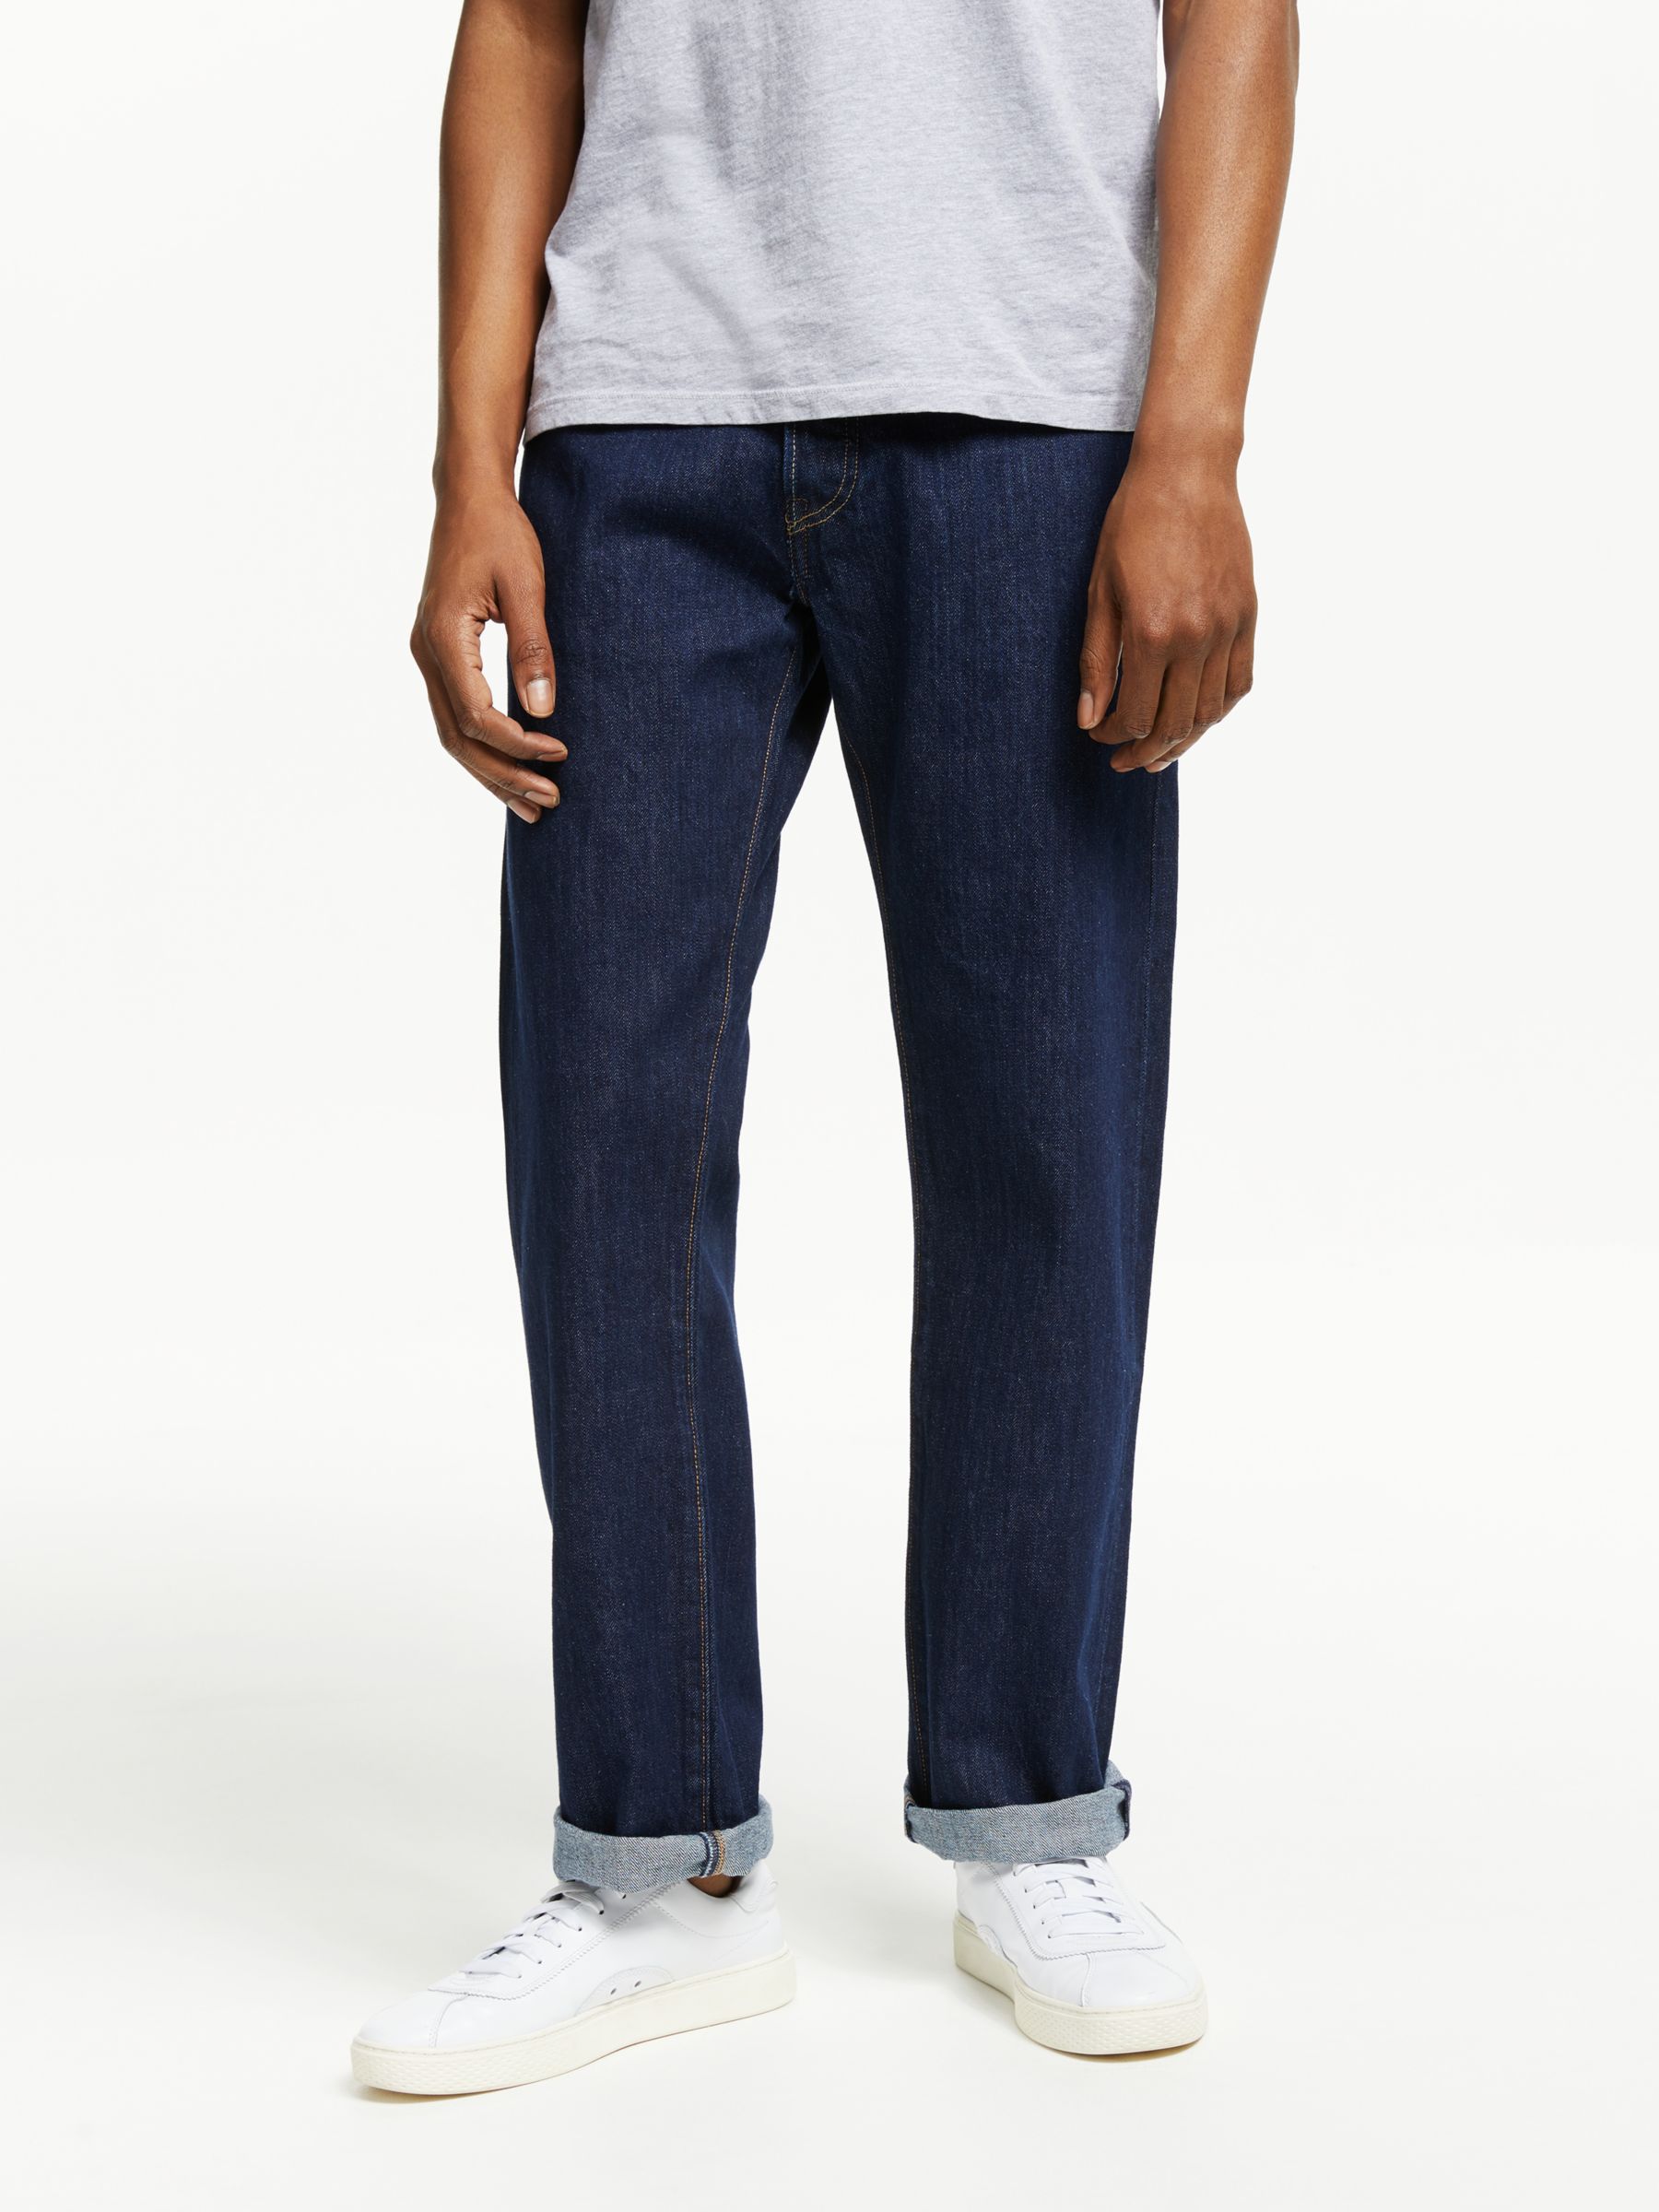 Levi's 501 Original Straight Jeans, One Wash at John Lewis & Partners